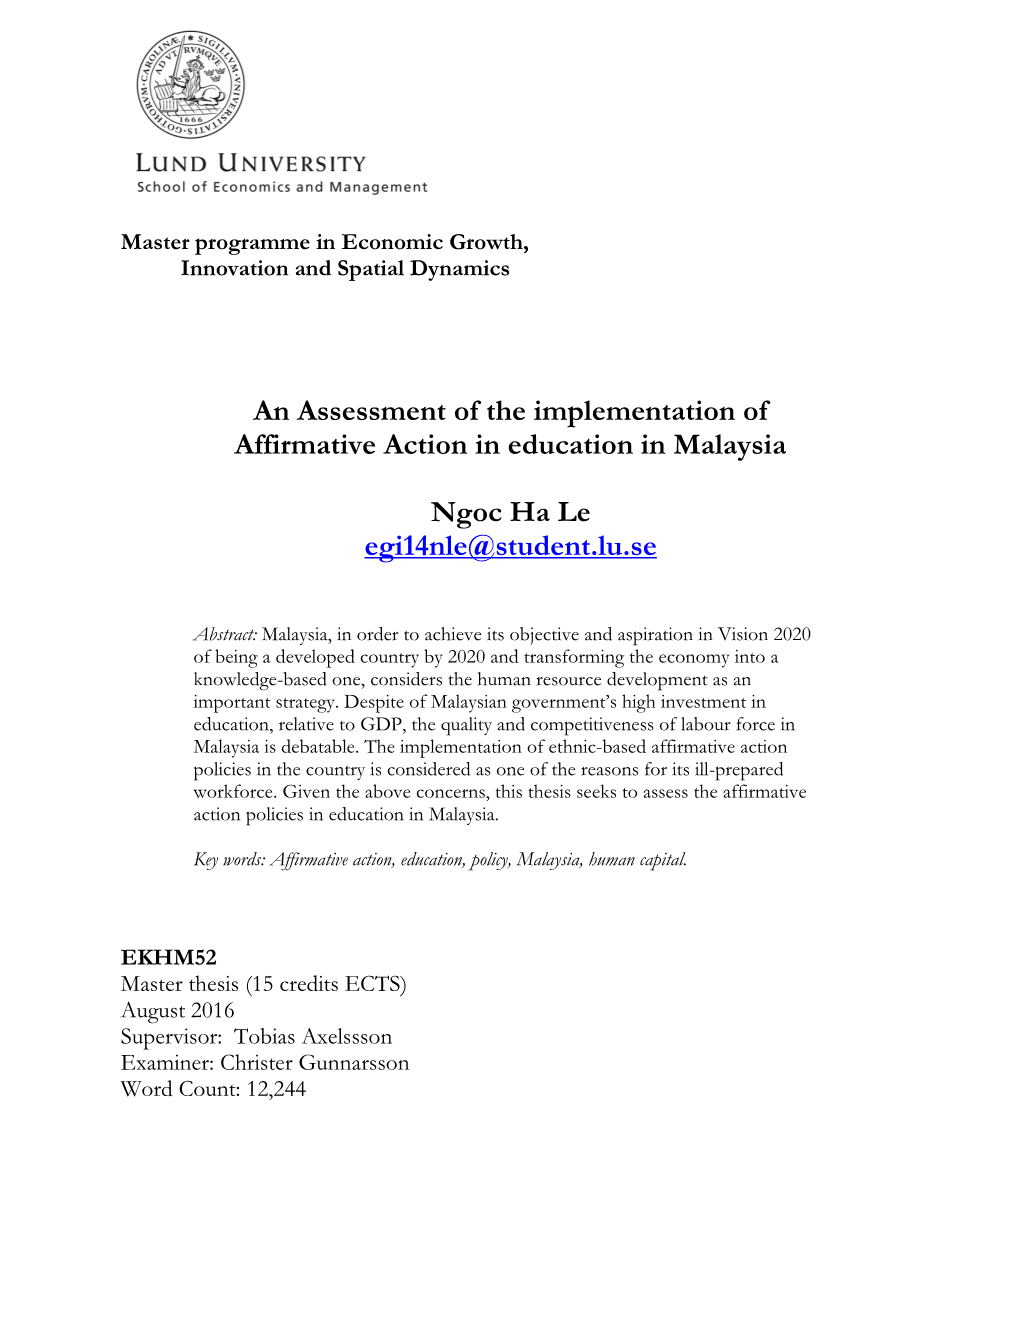 An Assessment of the Implementation of Affirmative Action in Education in Malaysia